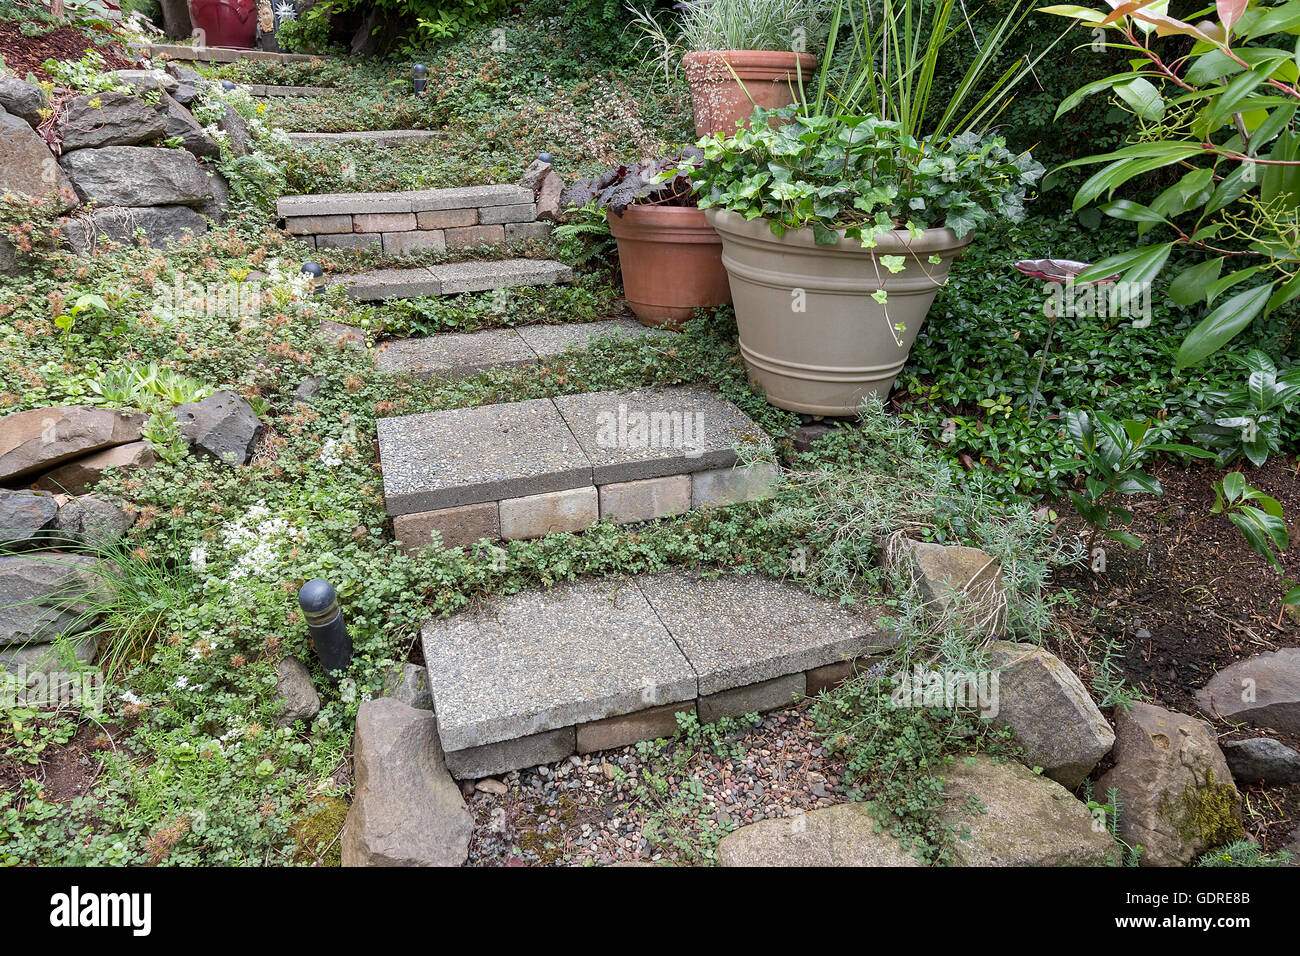 Cement stone steps with groundcover potted plants rocks bricks gravel leading to garden backyard Stock Photo